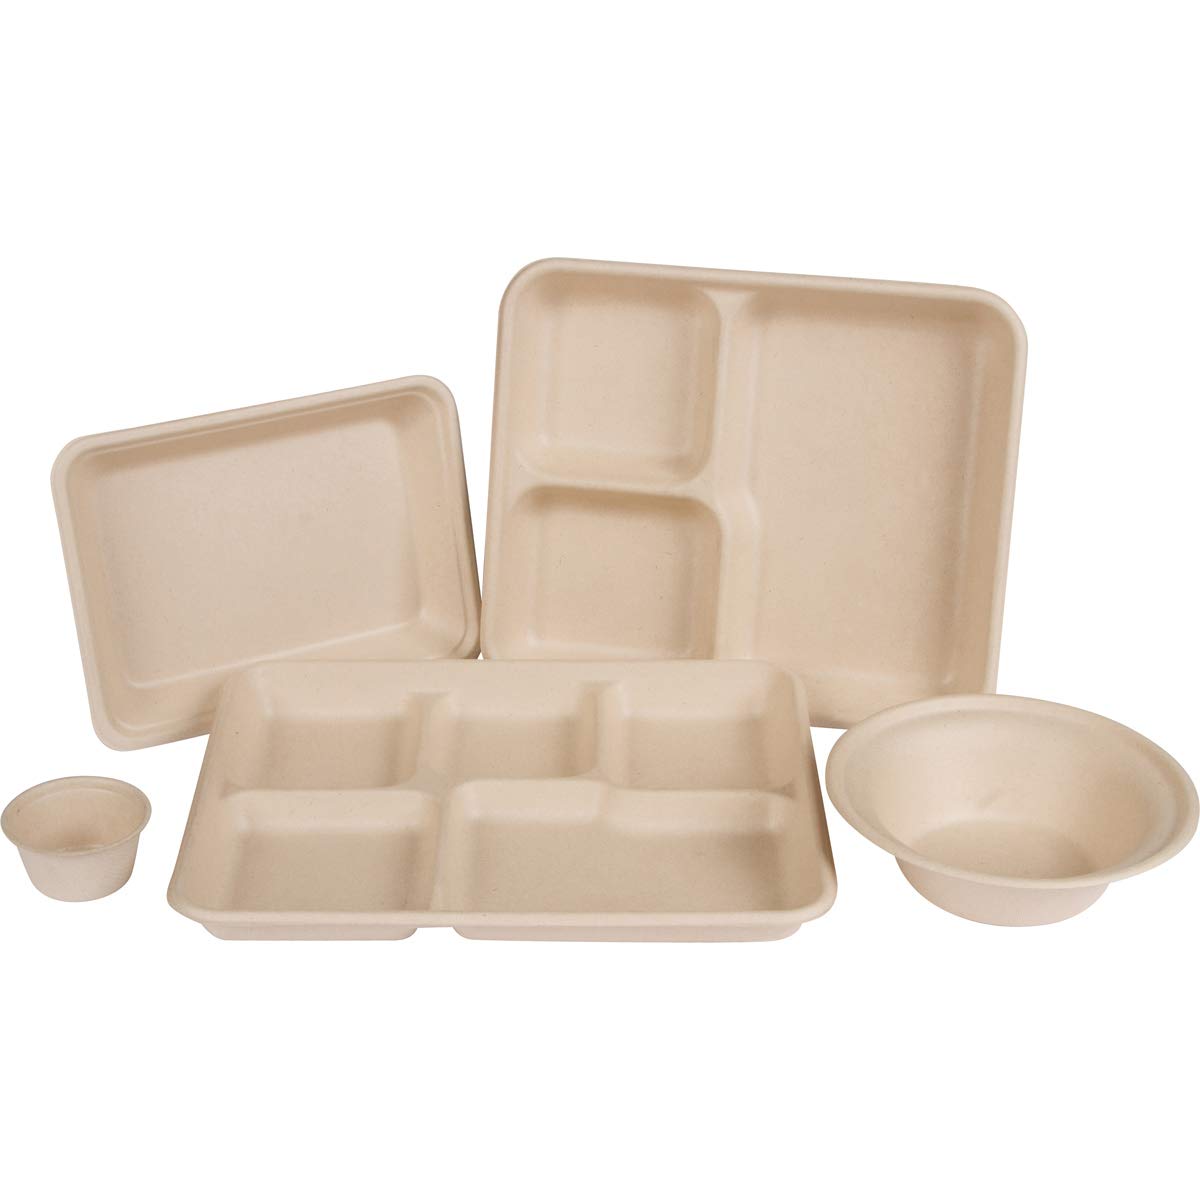 5 Compartment 6 Inch Bagasse Fiber Cake Tray